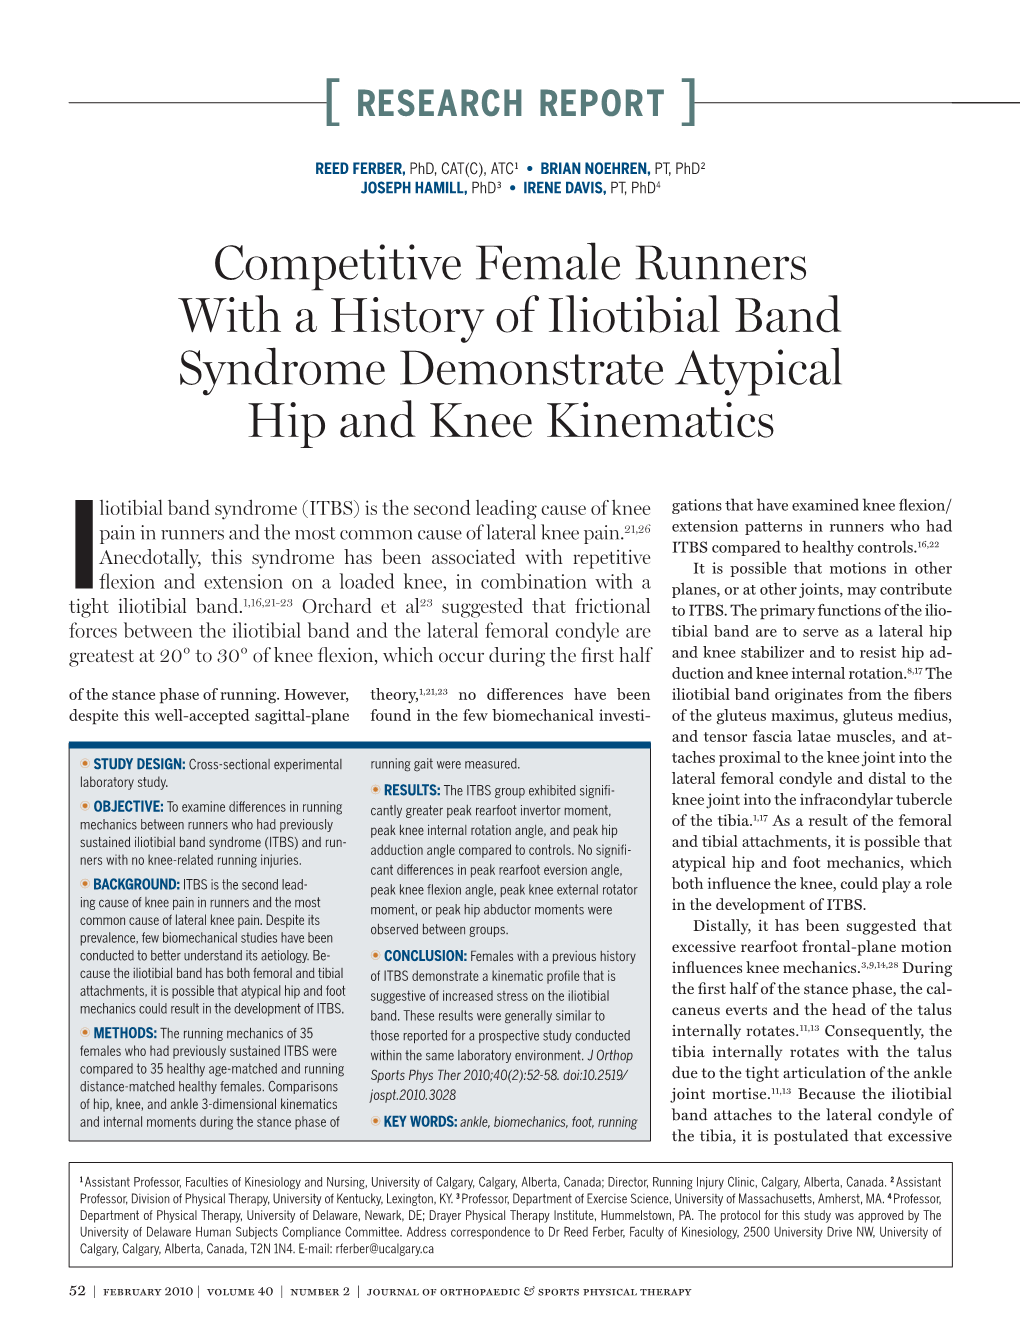 Competitive Female Runners with a History of Iliotibial Band Syndrome Demonstrate Atypical Hip and Knee Kinematics